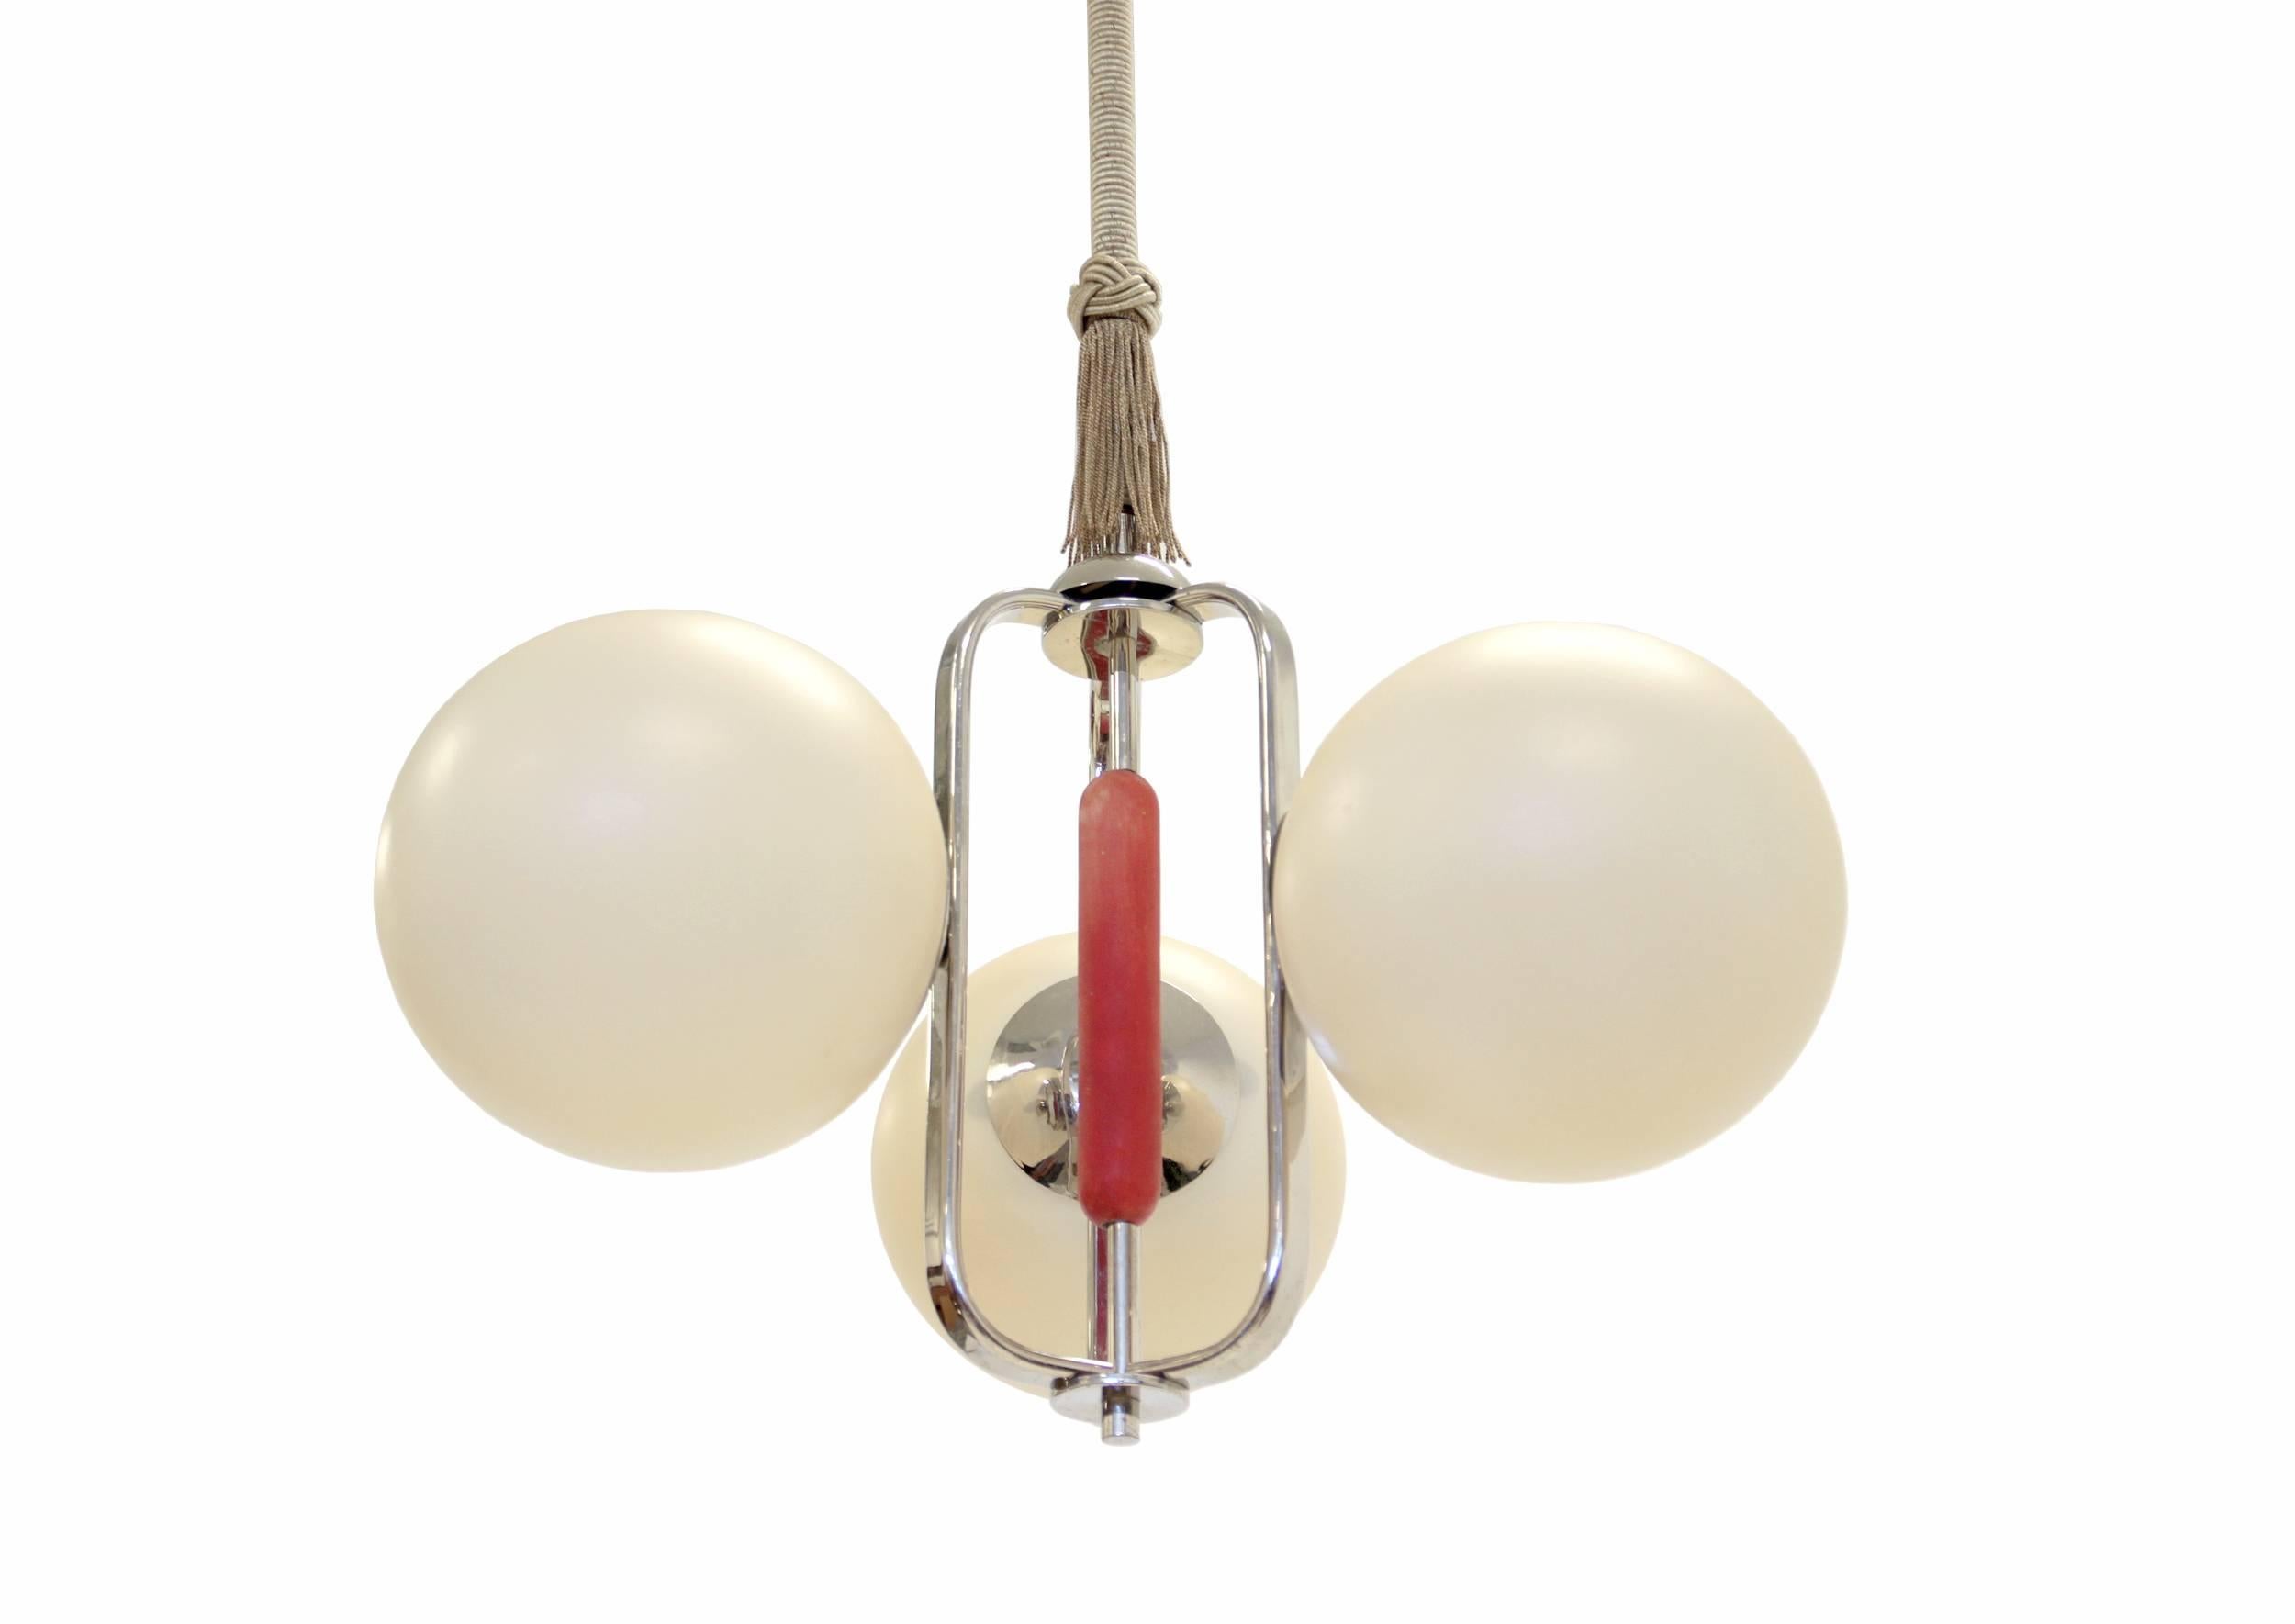 An exceptional and rare three-armed chandelier on a chromed steel frame with shades in opaline glass. The lamp is from the early 1950s when the 'funkis/functionalist' movement inspired by continental Bauhaus swept across Scandinavia. This particular